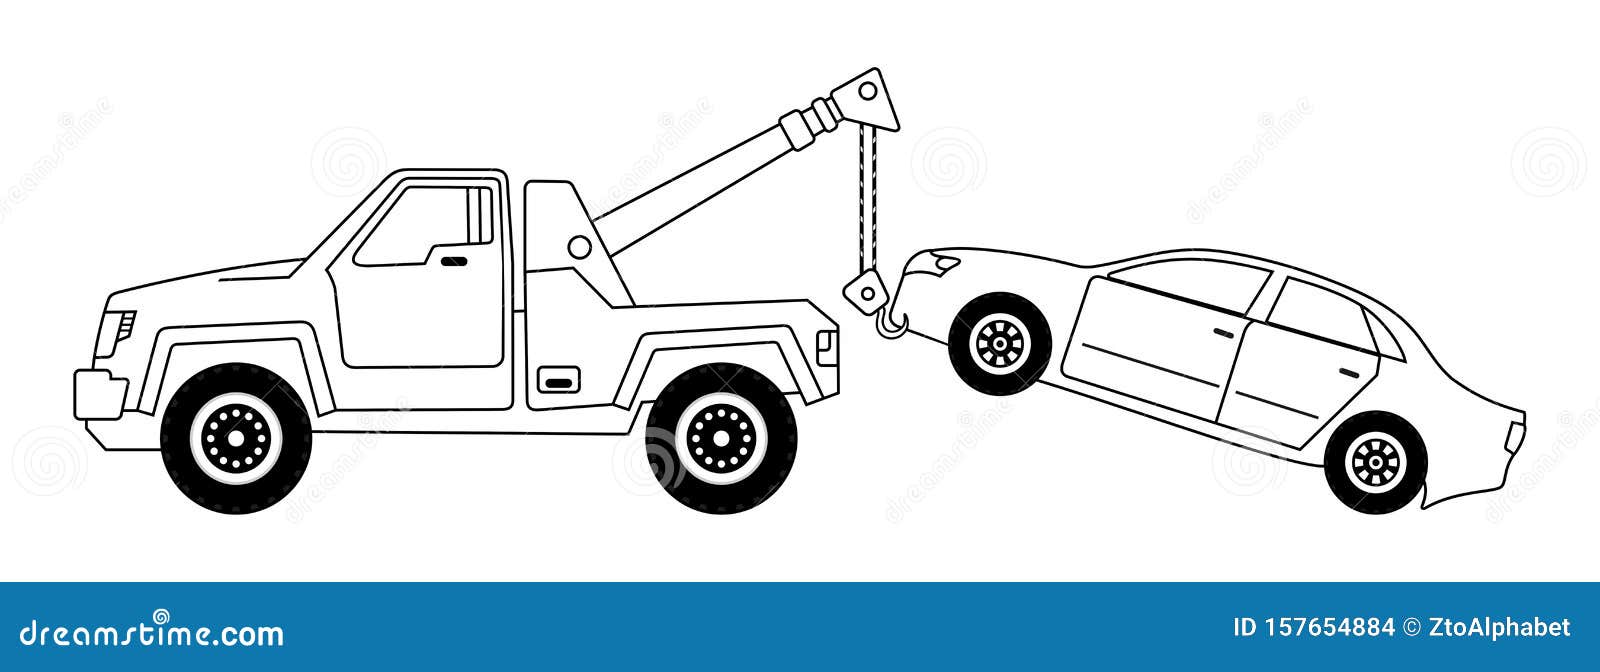 tow truck drawing easy